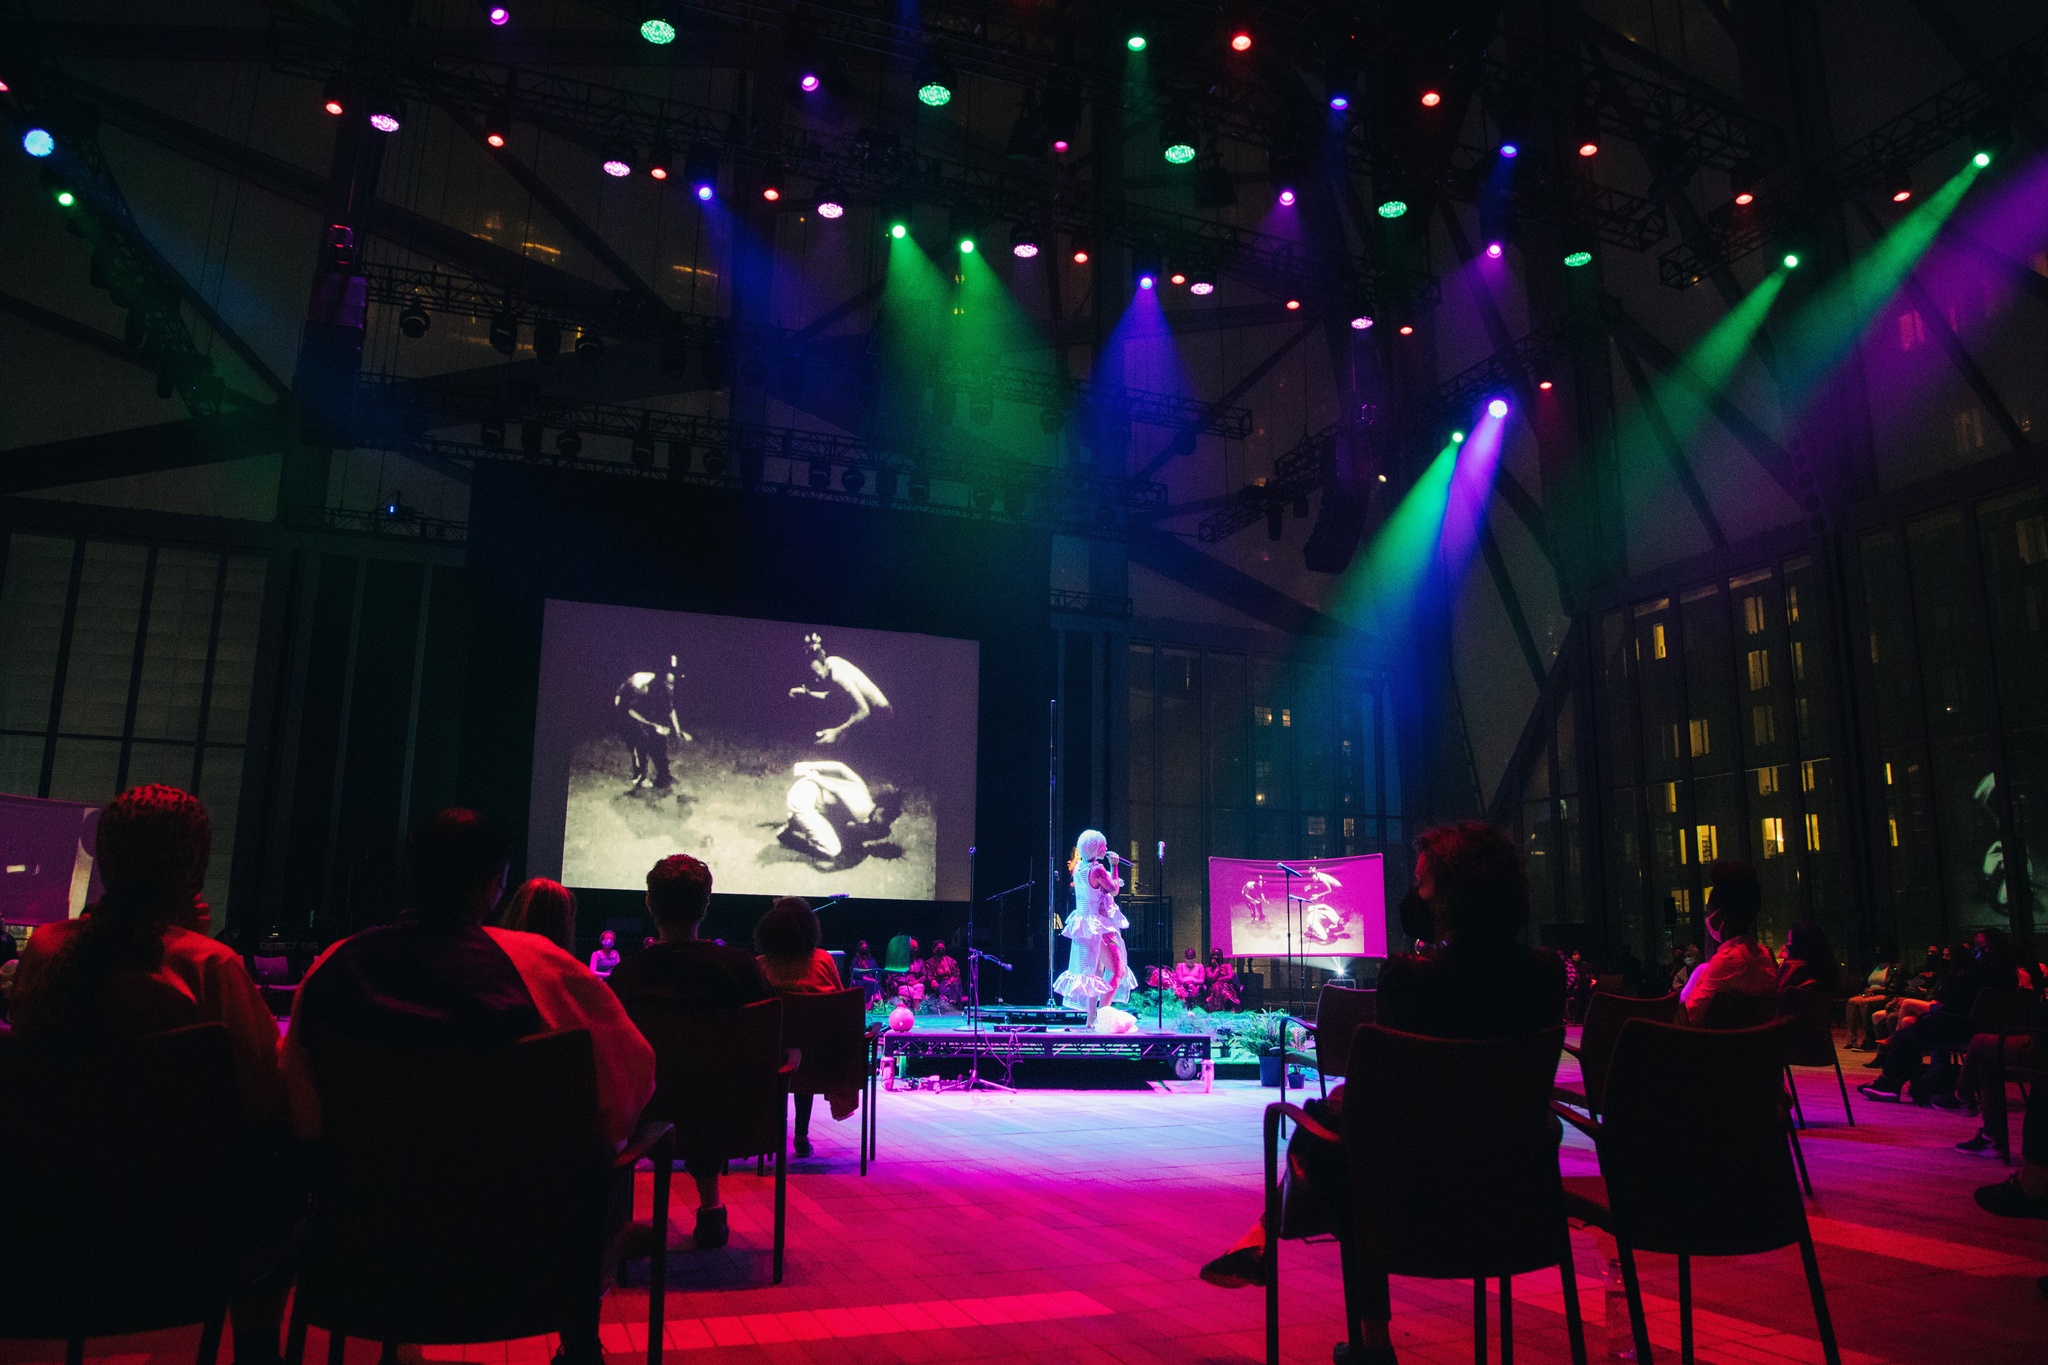 A performer stands on a round platform in the center of an audience, lit with purple and green spotlights. In the background, two video screens project a film of three people dancing.